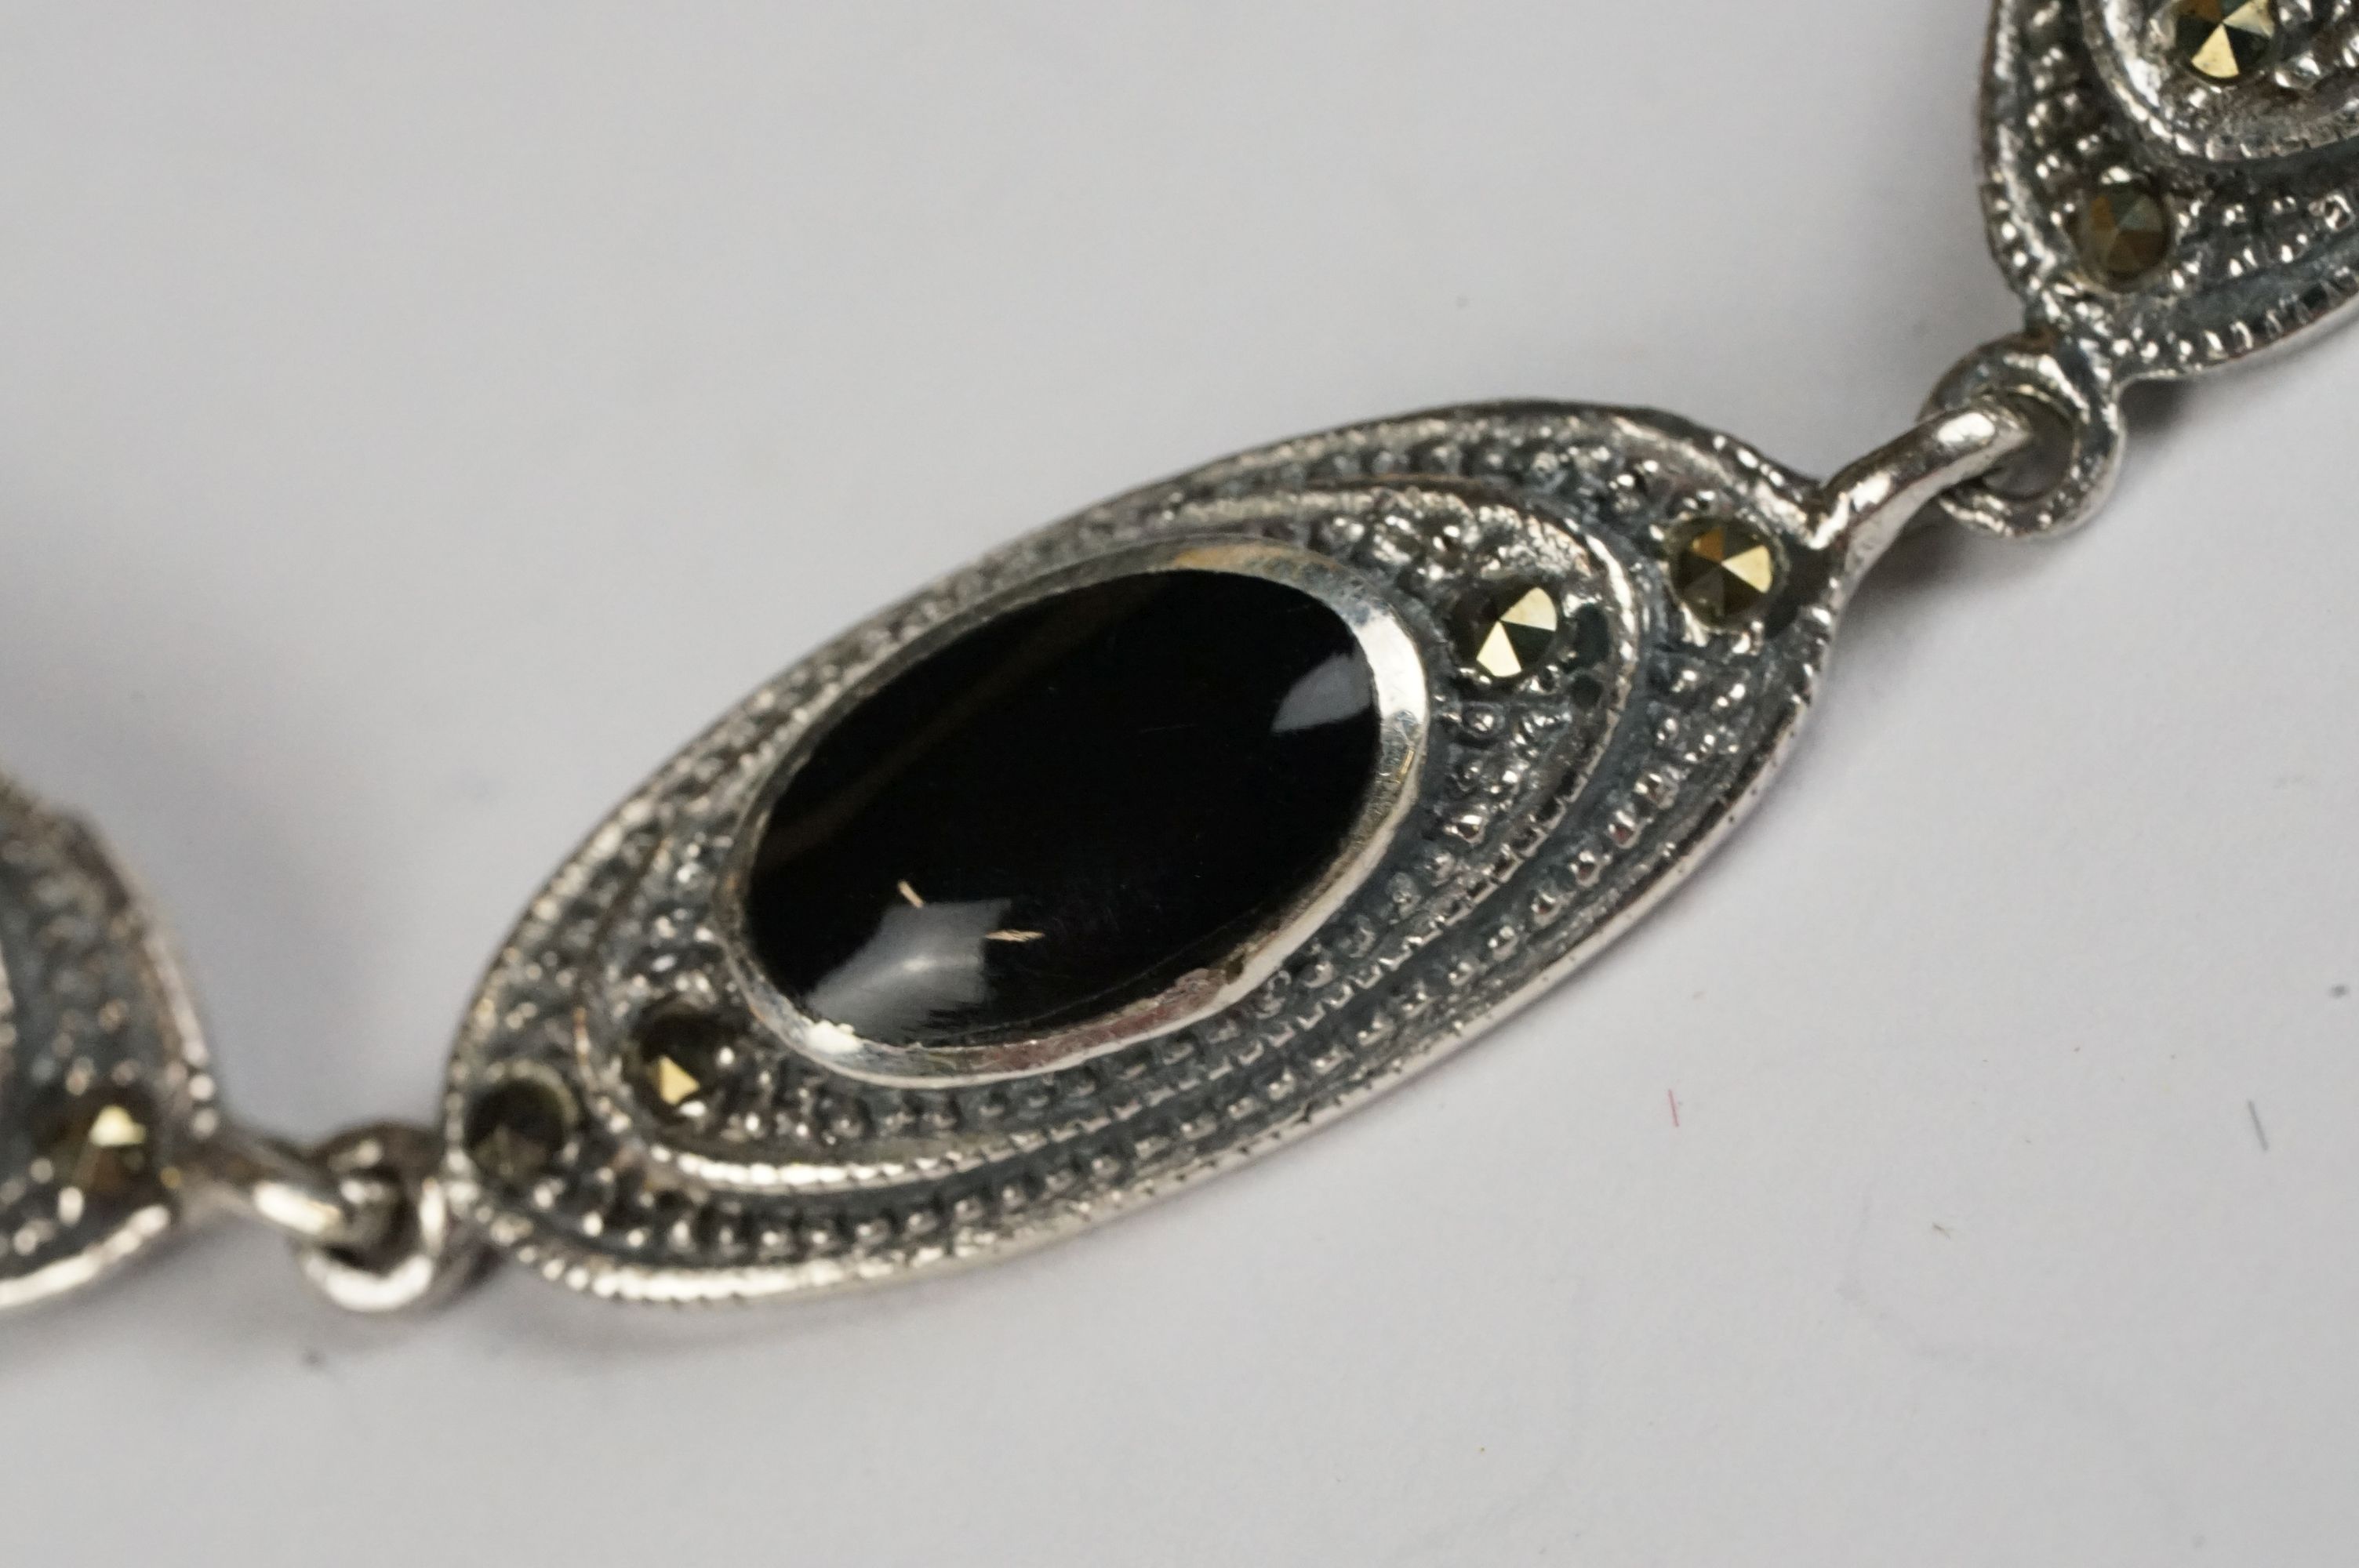 Silver Marcasite and Onyx Bracelet - Image 6 of 8